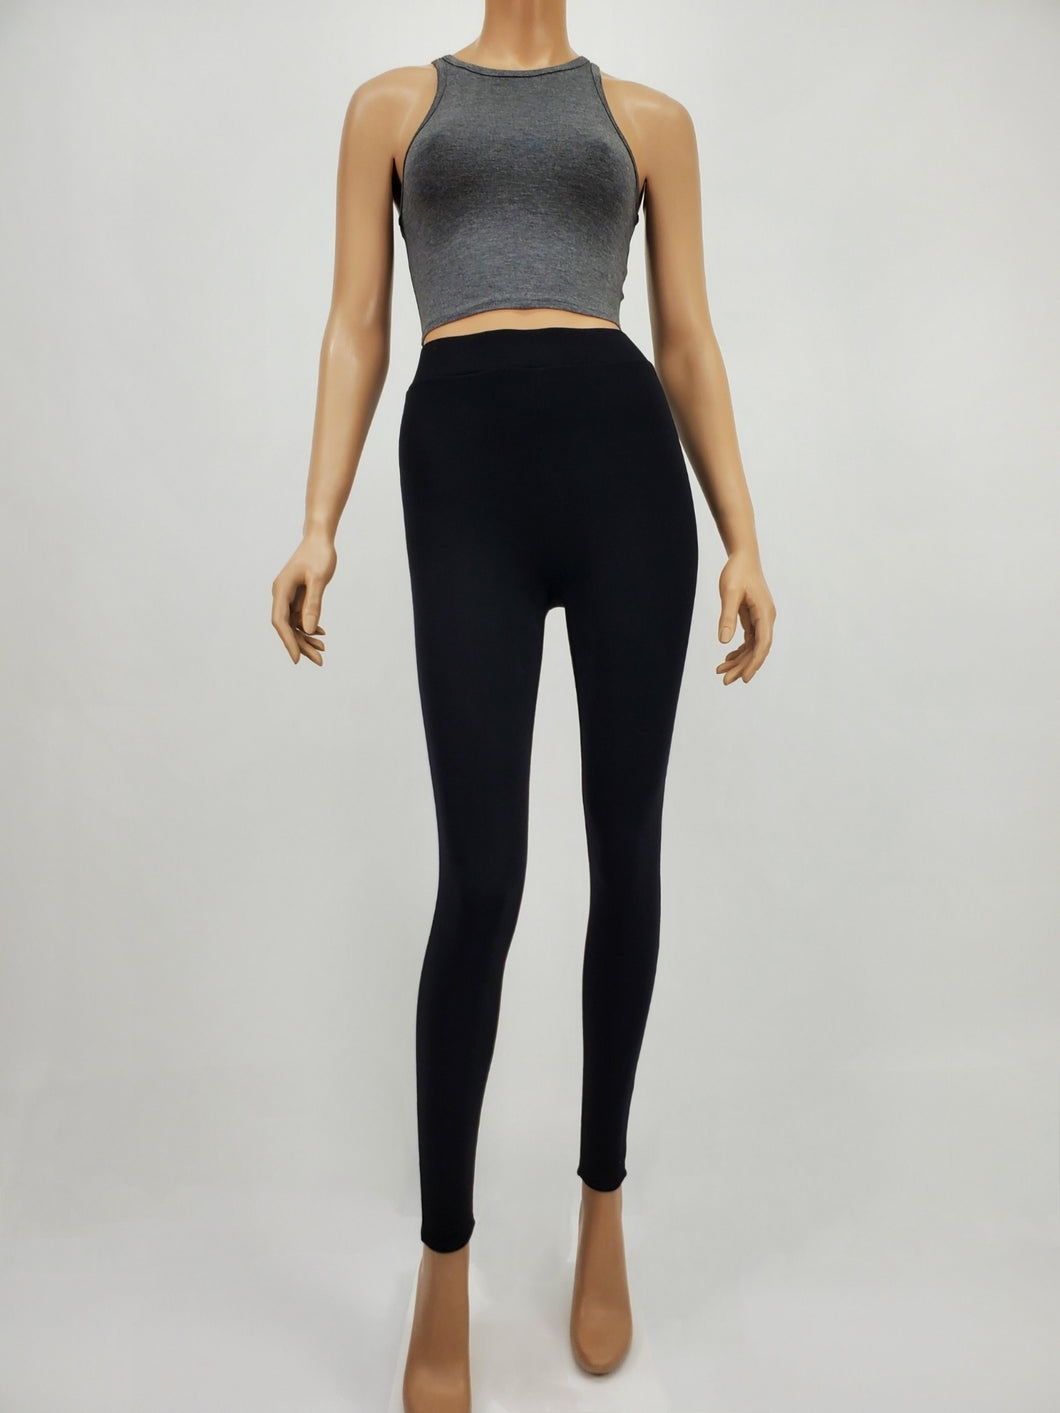 Solid Color High Neck Crop Tank Top (Charcoal)